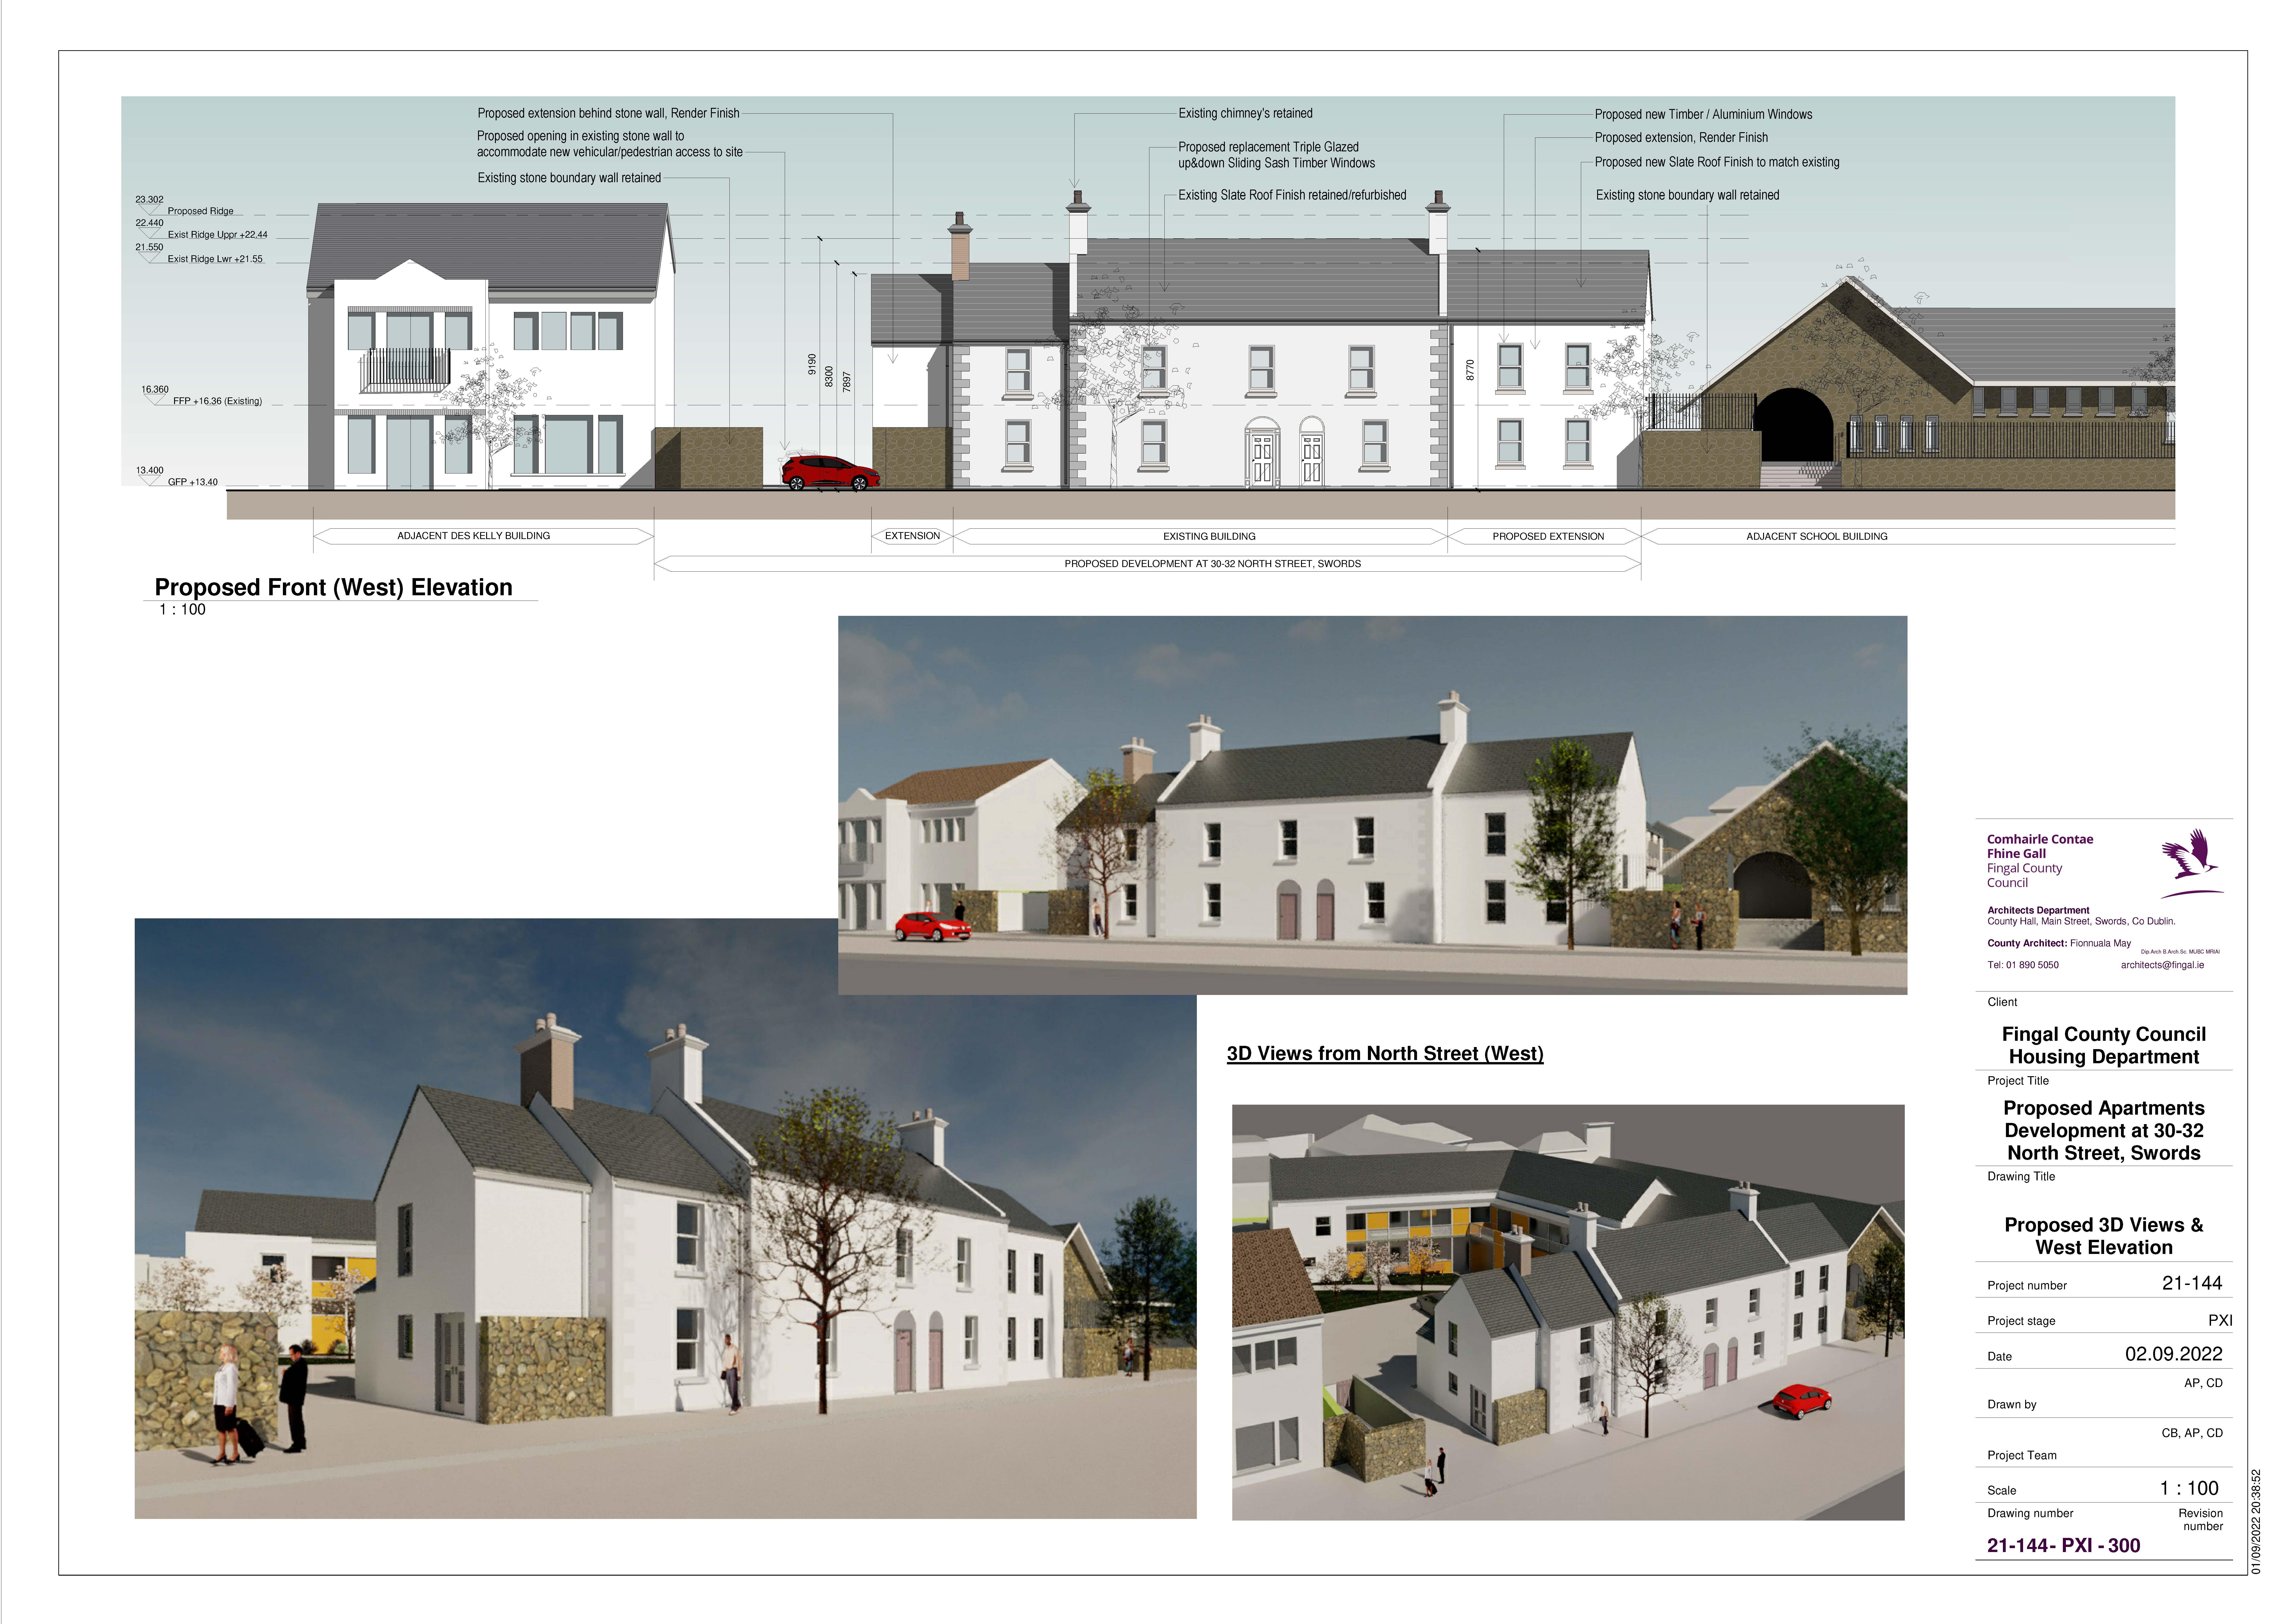 North Street Swords Proposed 3D Views & West Elevation